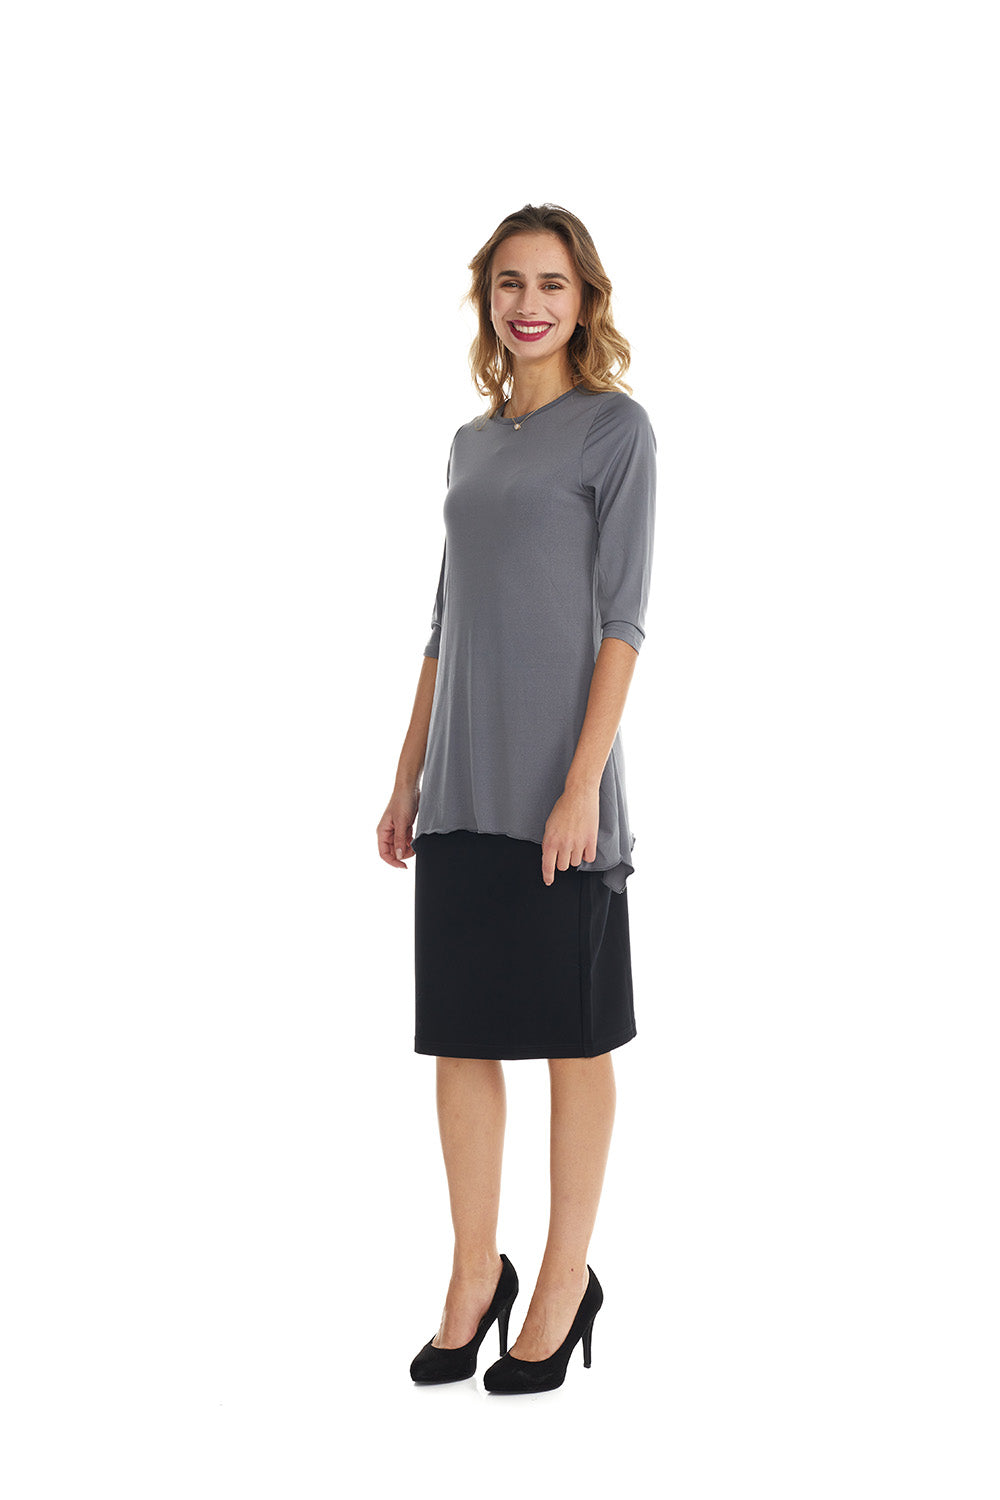 charcoal gray tznius 3/4 sleeve tunic top with uneven hem